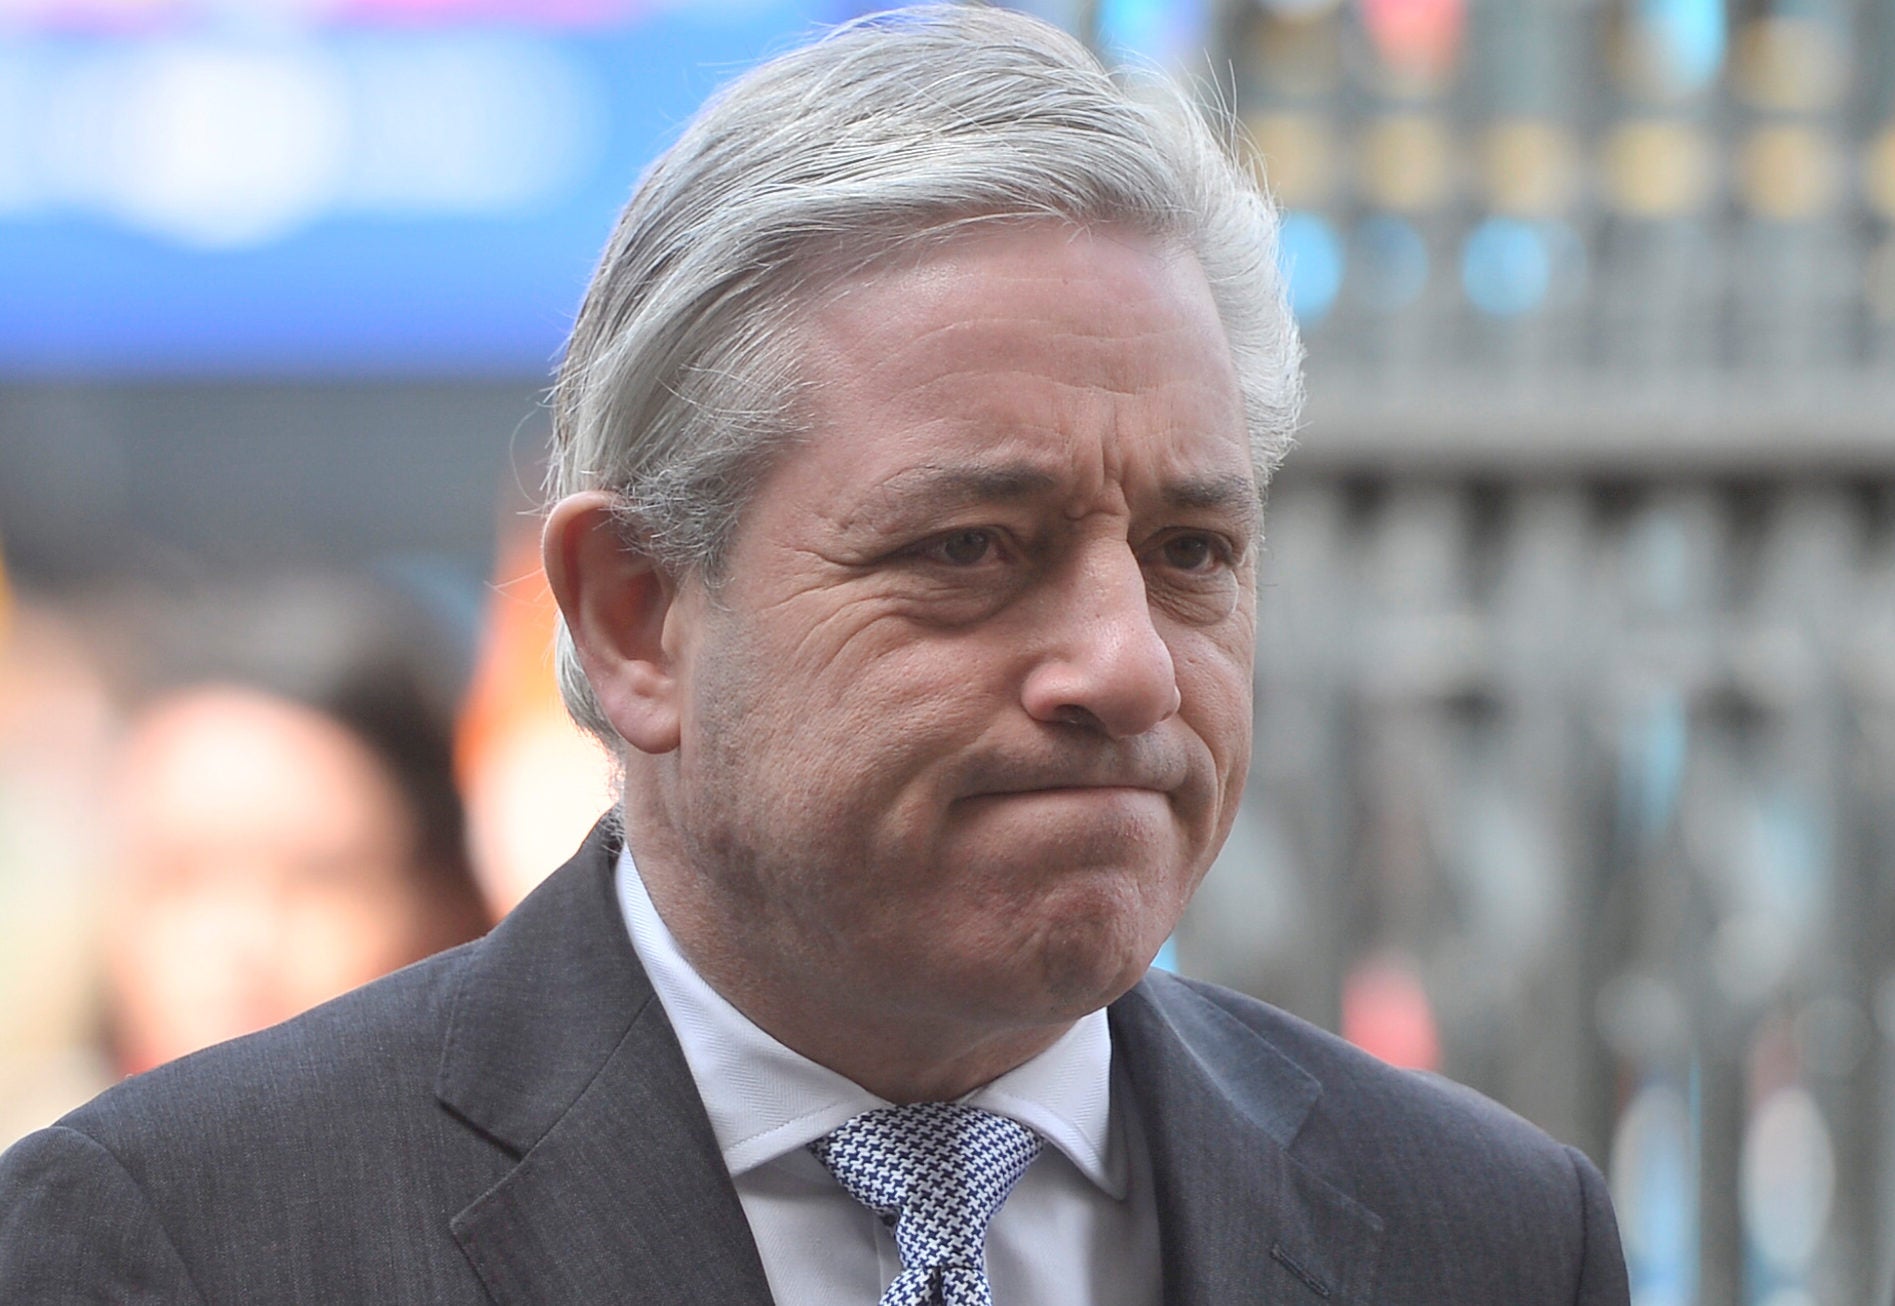 Commons speaker John Bercow calls for 'more women' to be given chance to serve in parliamentary press gallery